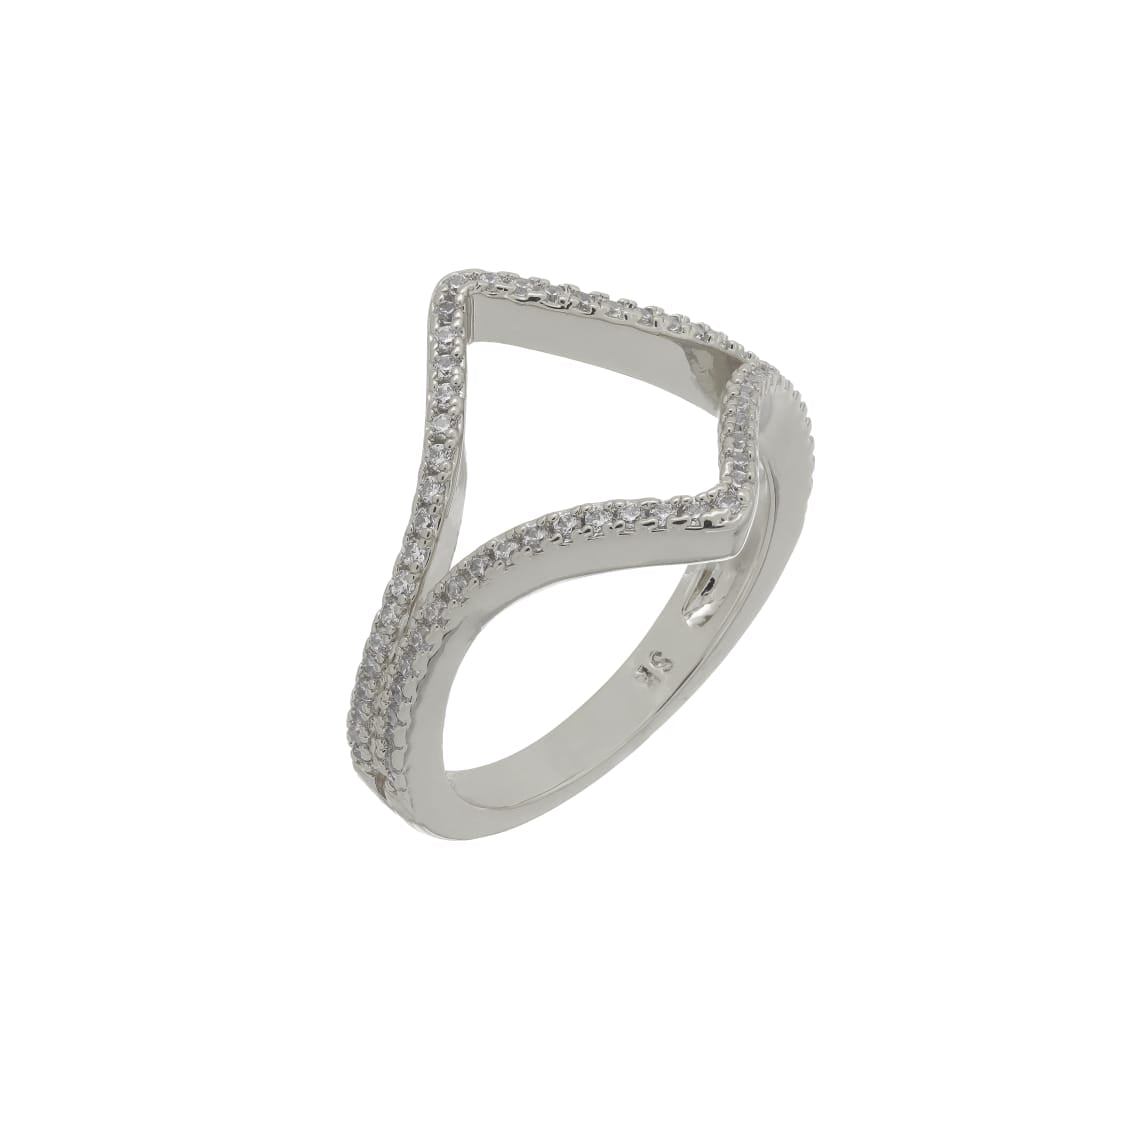 Double V Head Casual Ring